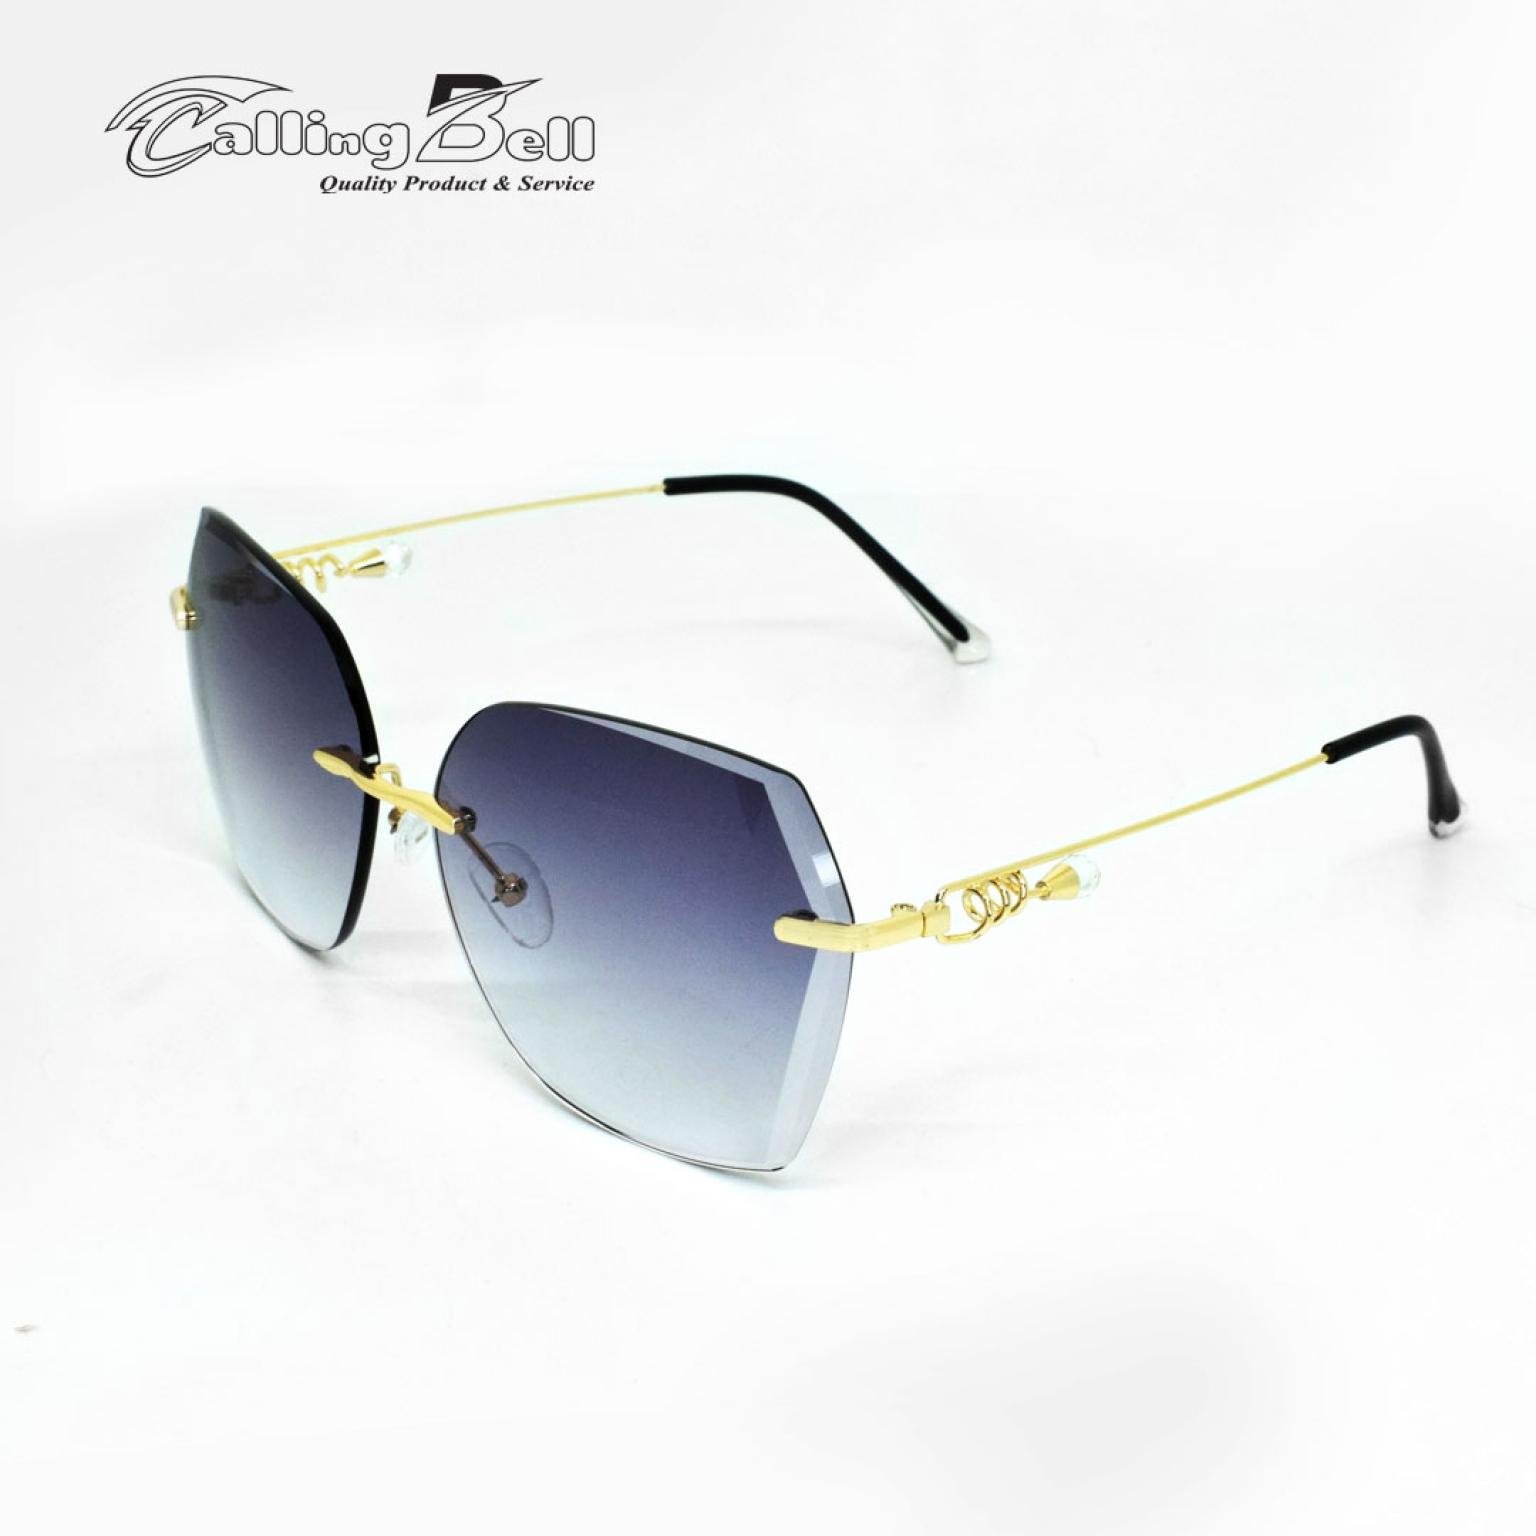 FASHIONABLE LADIES TRENDY SUNGLASS BROWN PURPLE LENS WITH GOLDEN FRAME FOR WOMEN 